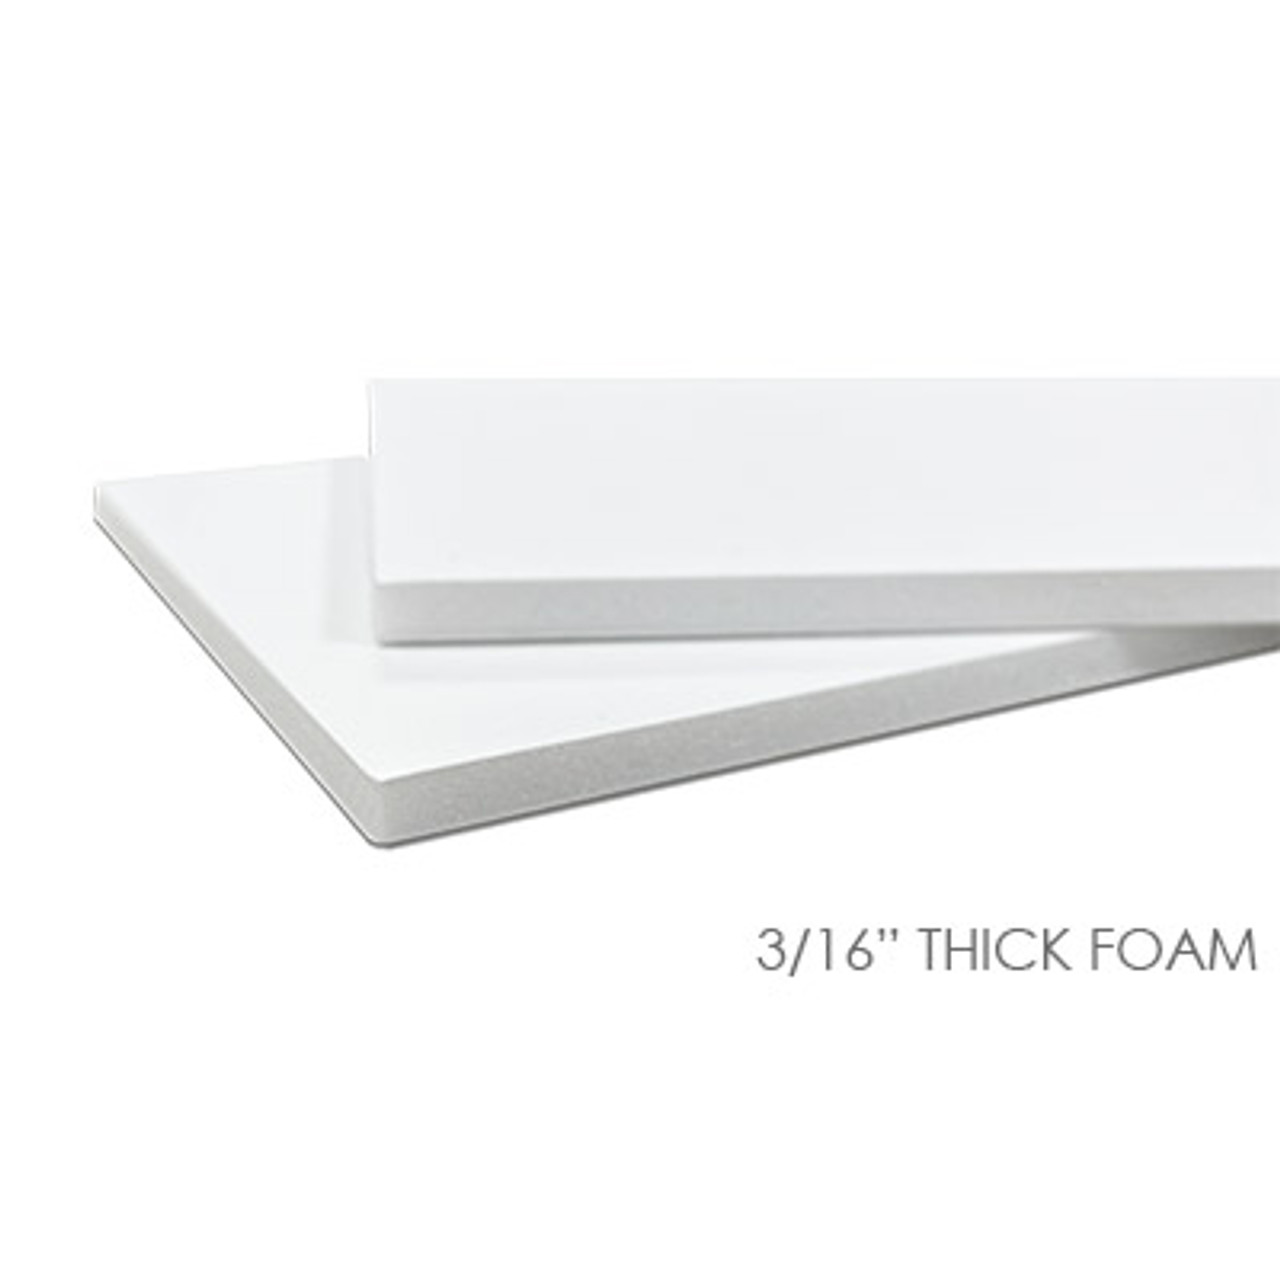 Buy Affordable High Performance thick styrofoam board 